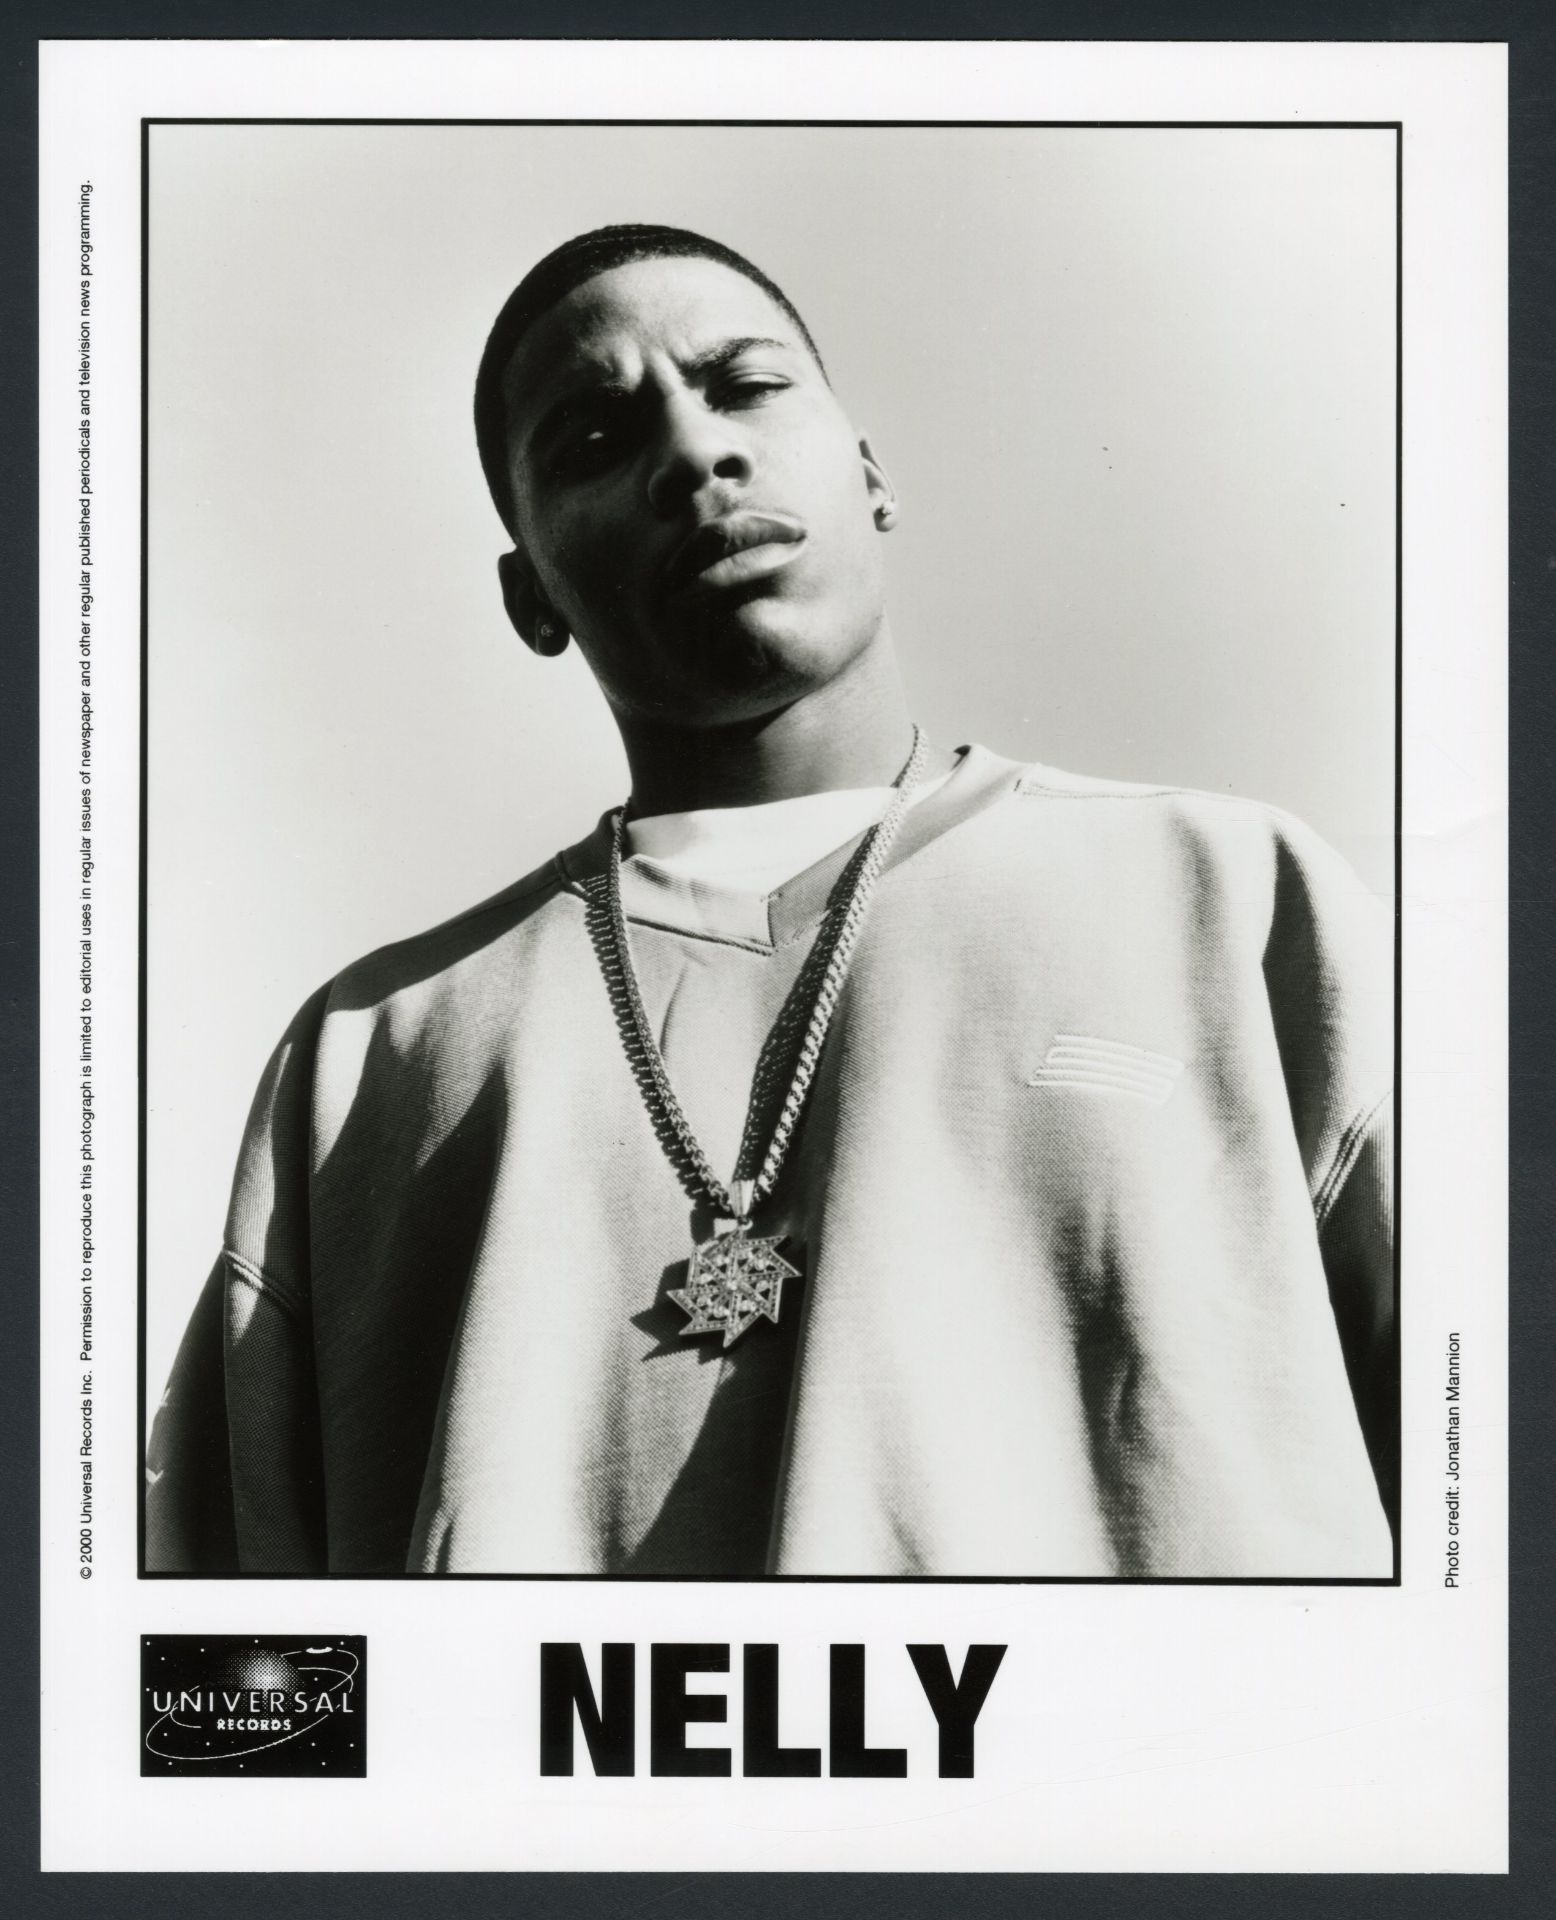 Nelly Photo from Star Tribune Archives